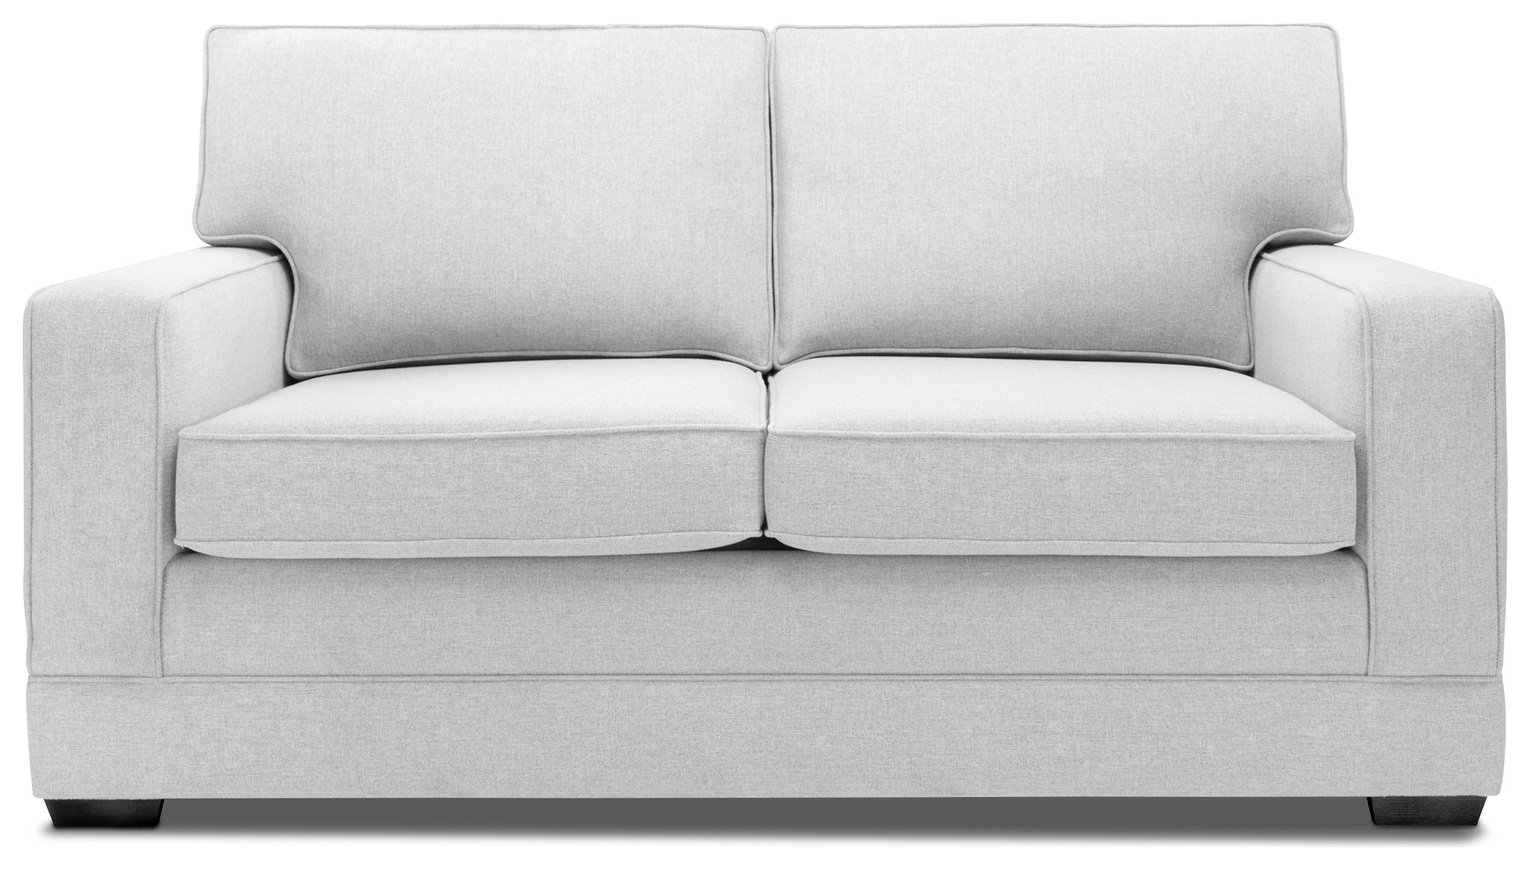 Jay-Be Modern Fabric 2 Seater Sofabed - Silver